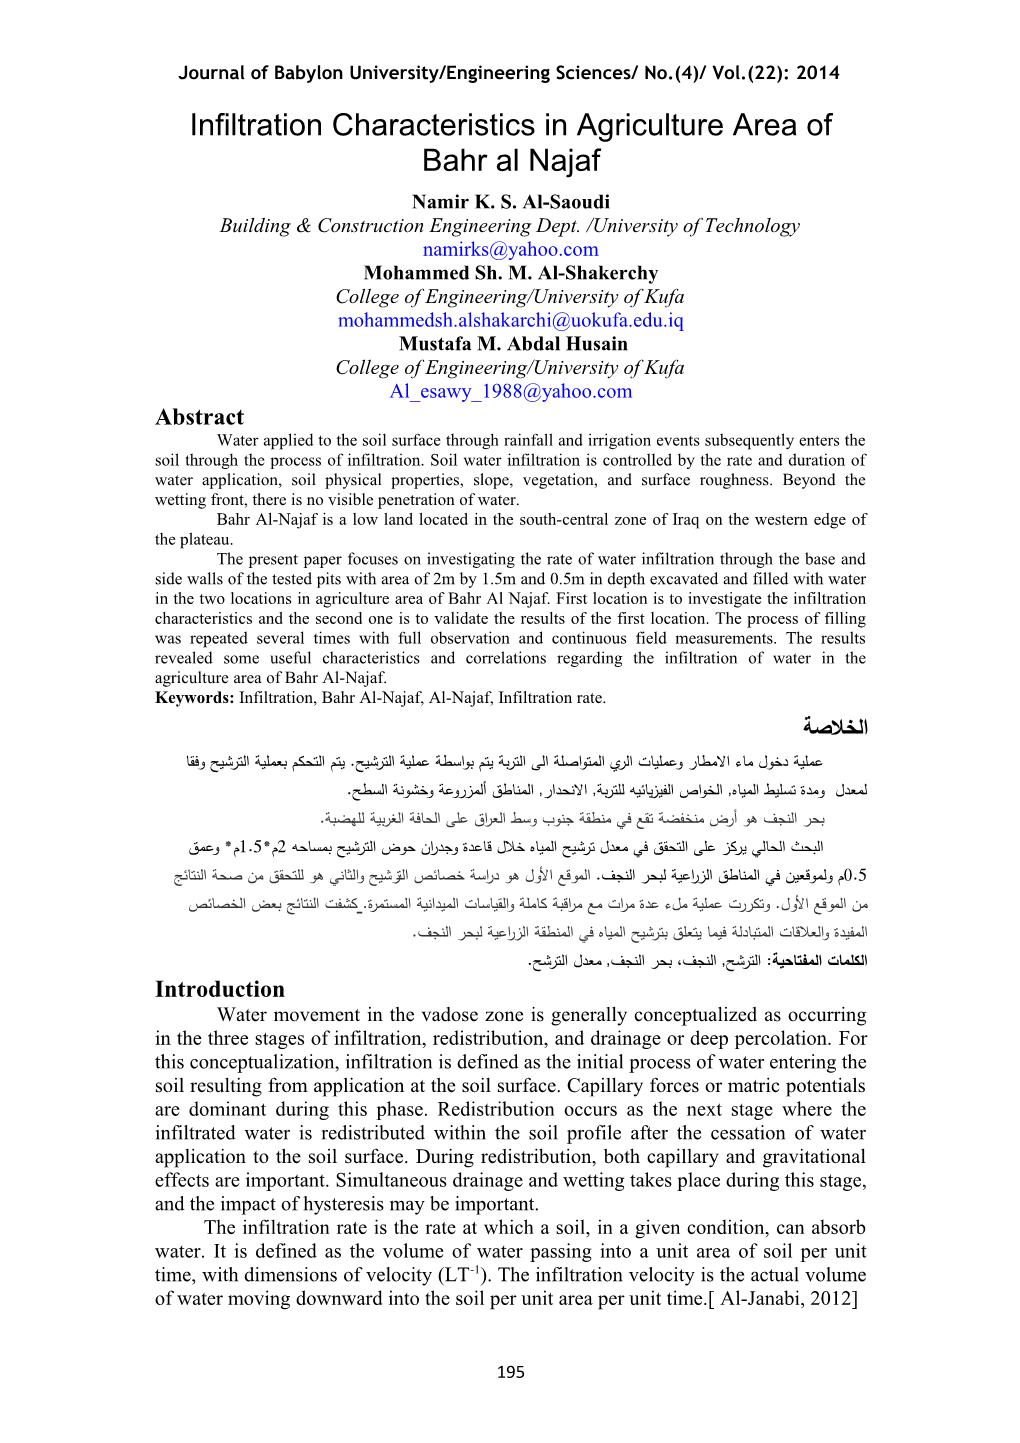 Infiltration Characteristics In Agriculture Area Of Bahr Al Najaf